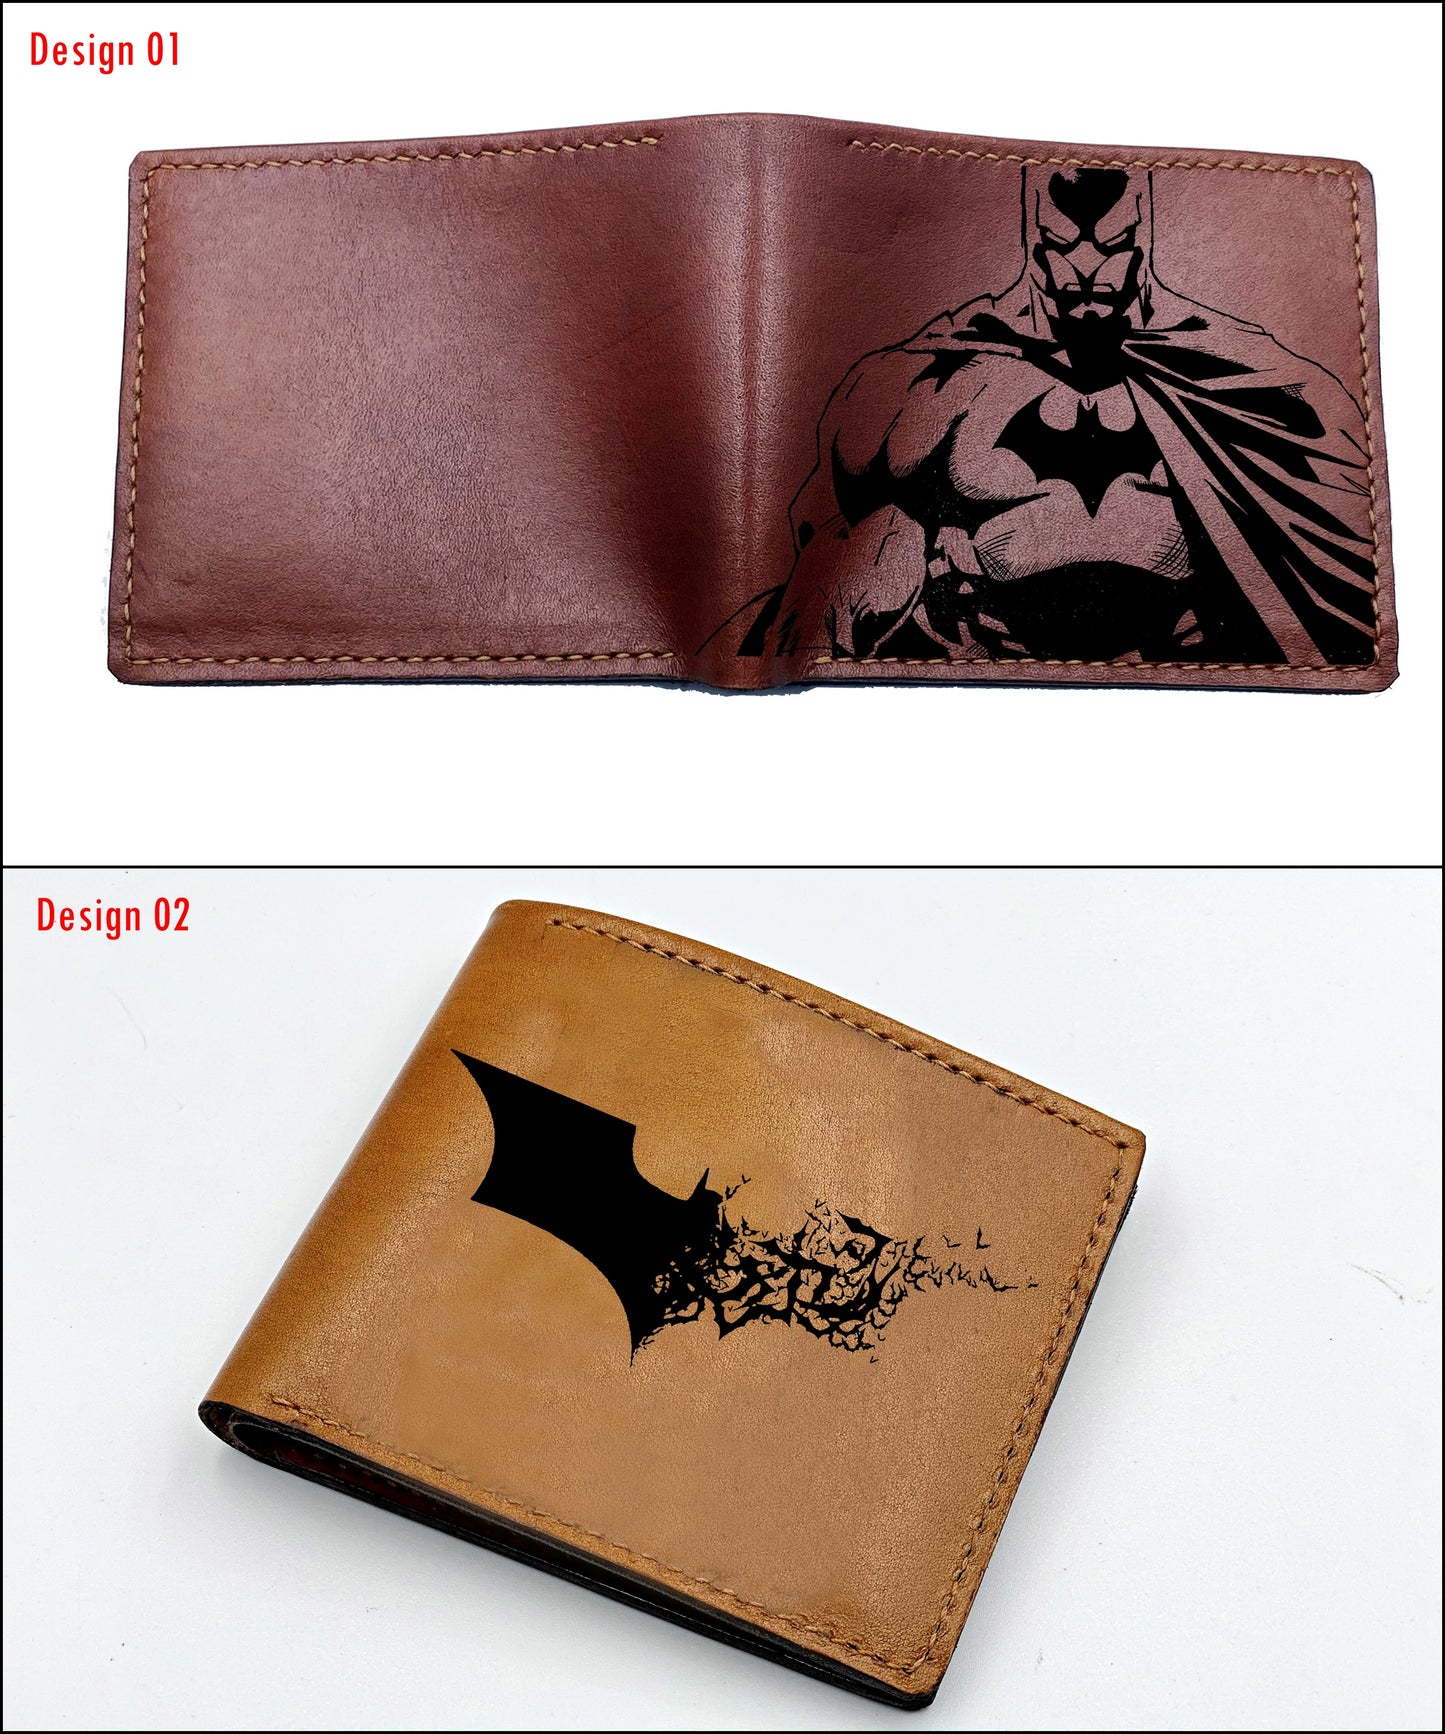 Mayan Corner - Superheroes leather gift idea, customized batman leather wallet, superheroes present for dad, cool wallet for brother, leather anniversary gift idea